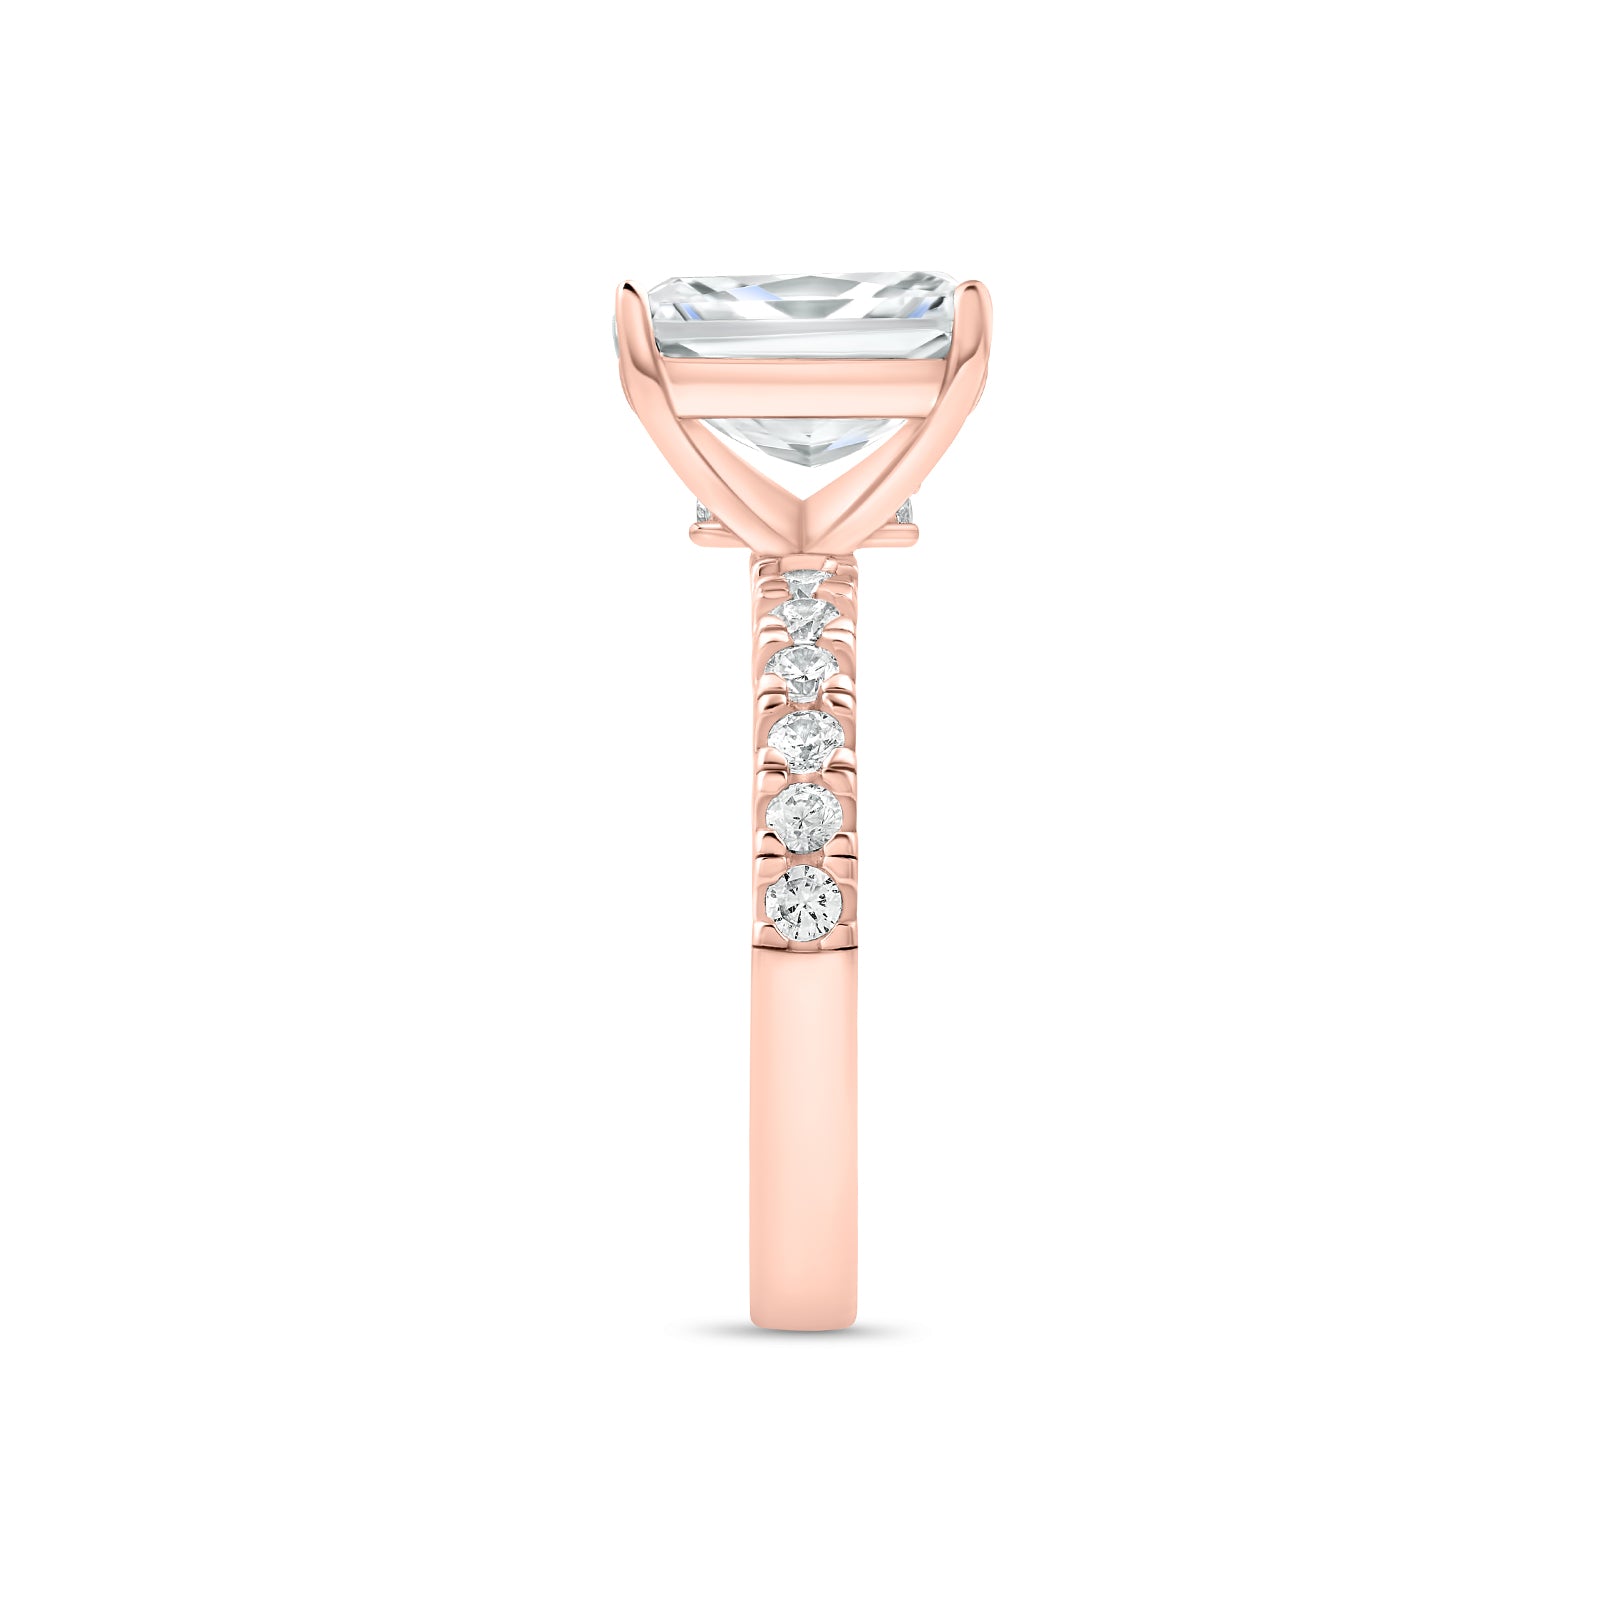 Side profile of rose gold radiant cut engagement ring with half eternity band detailing